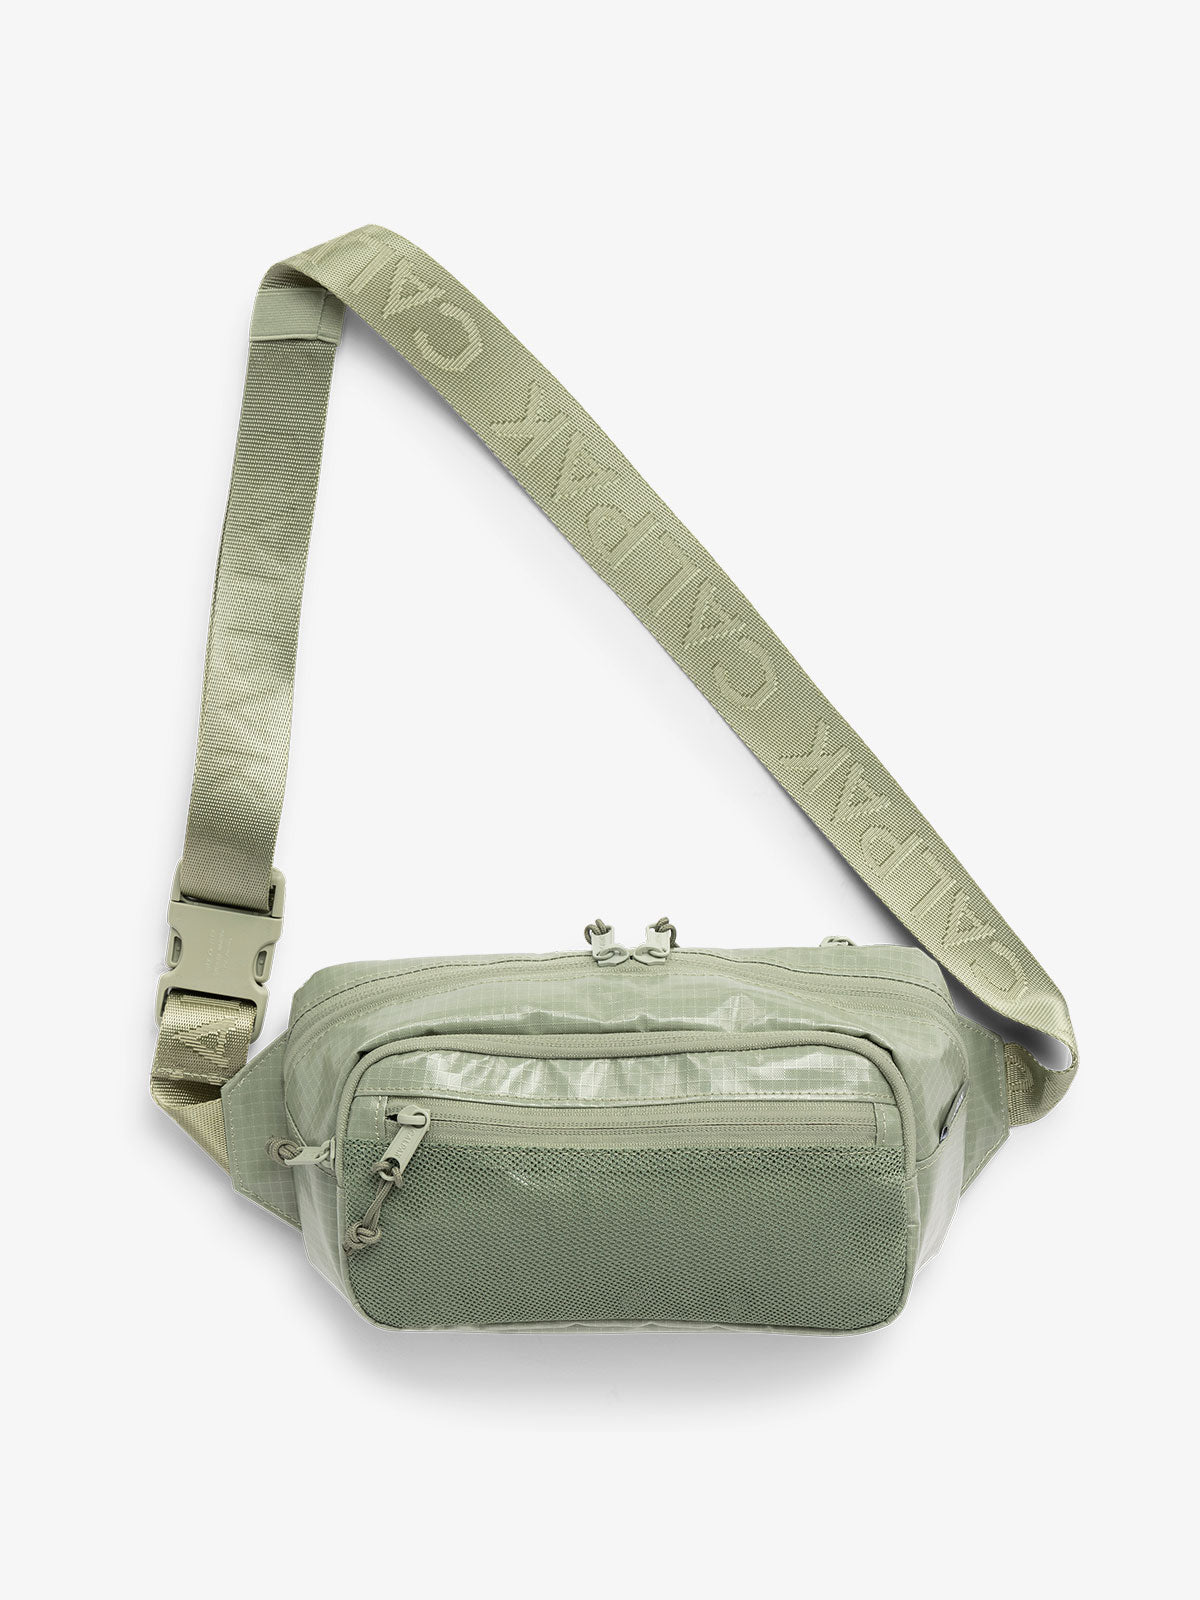 Terra small belt bag with adjustable nylon strap in green